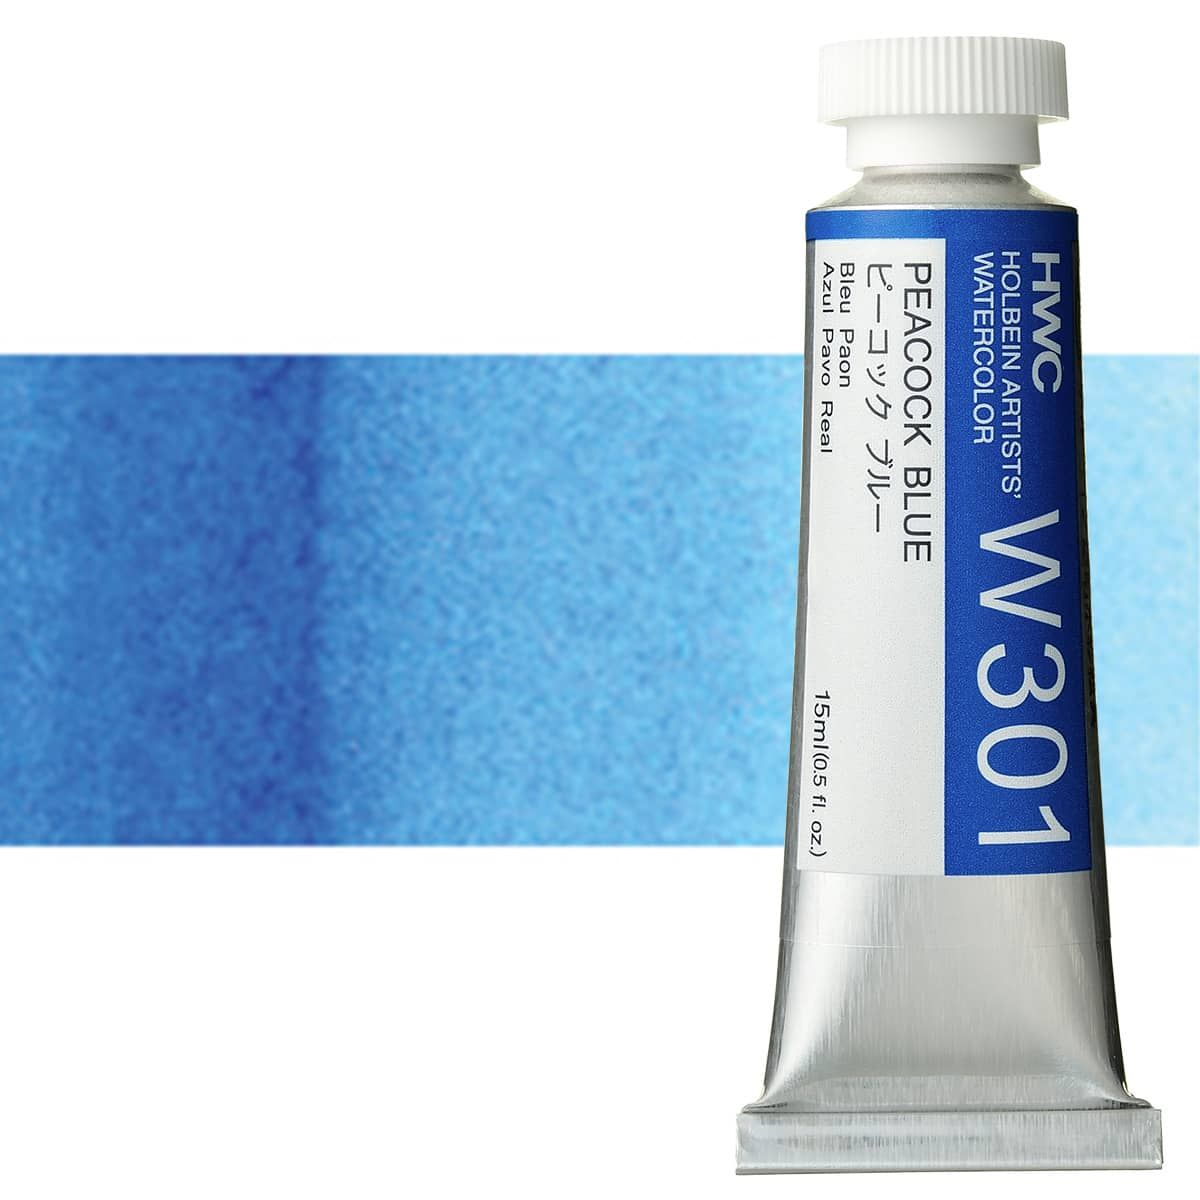 Holbein Artists' Watercolor 15 ml Tube - Peacock Blue